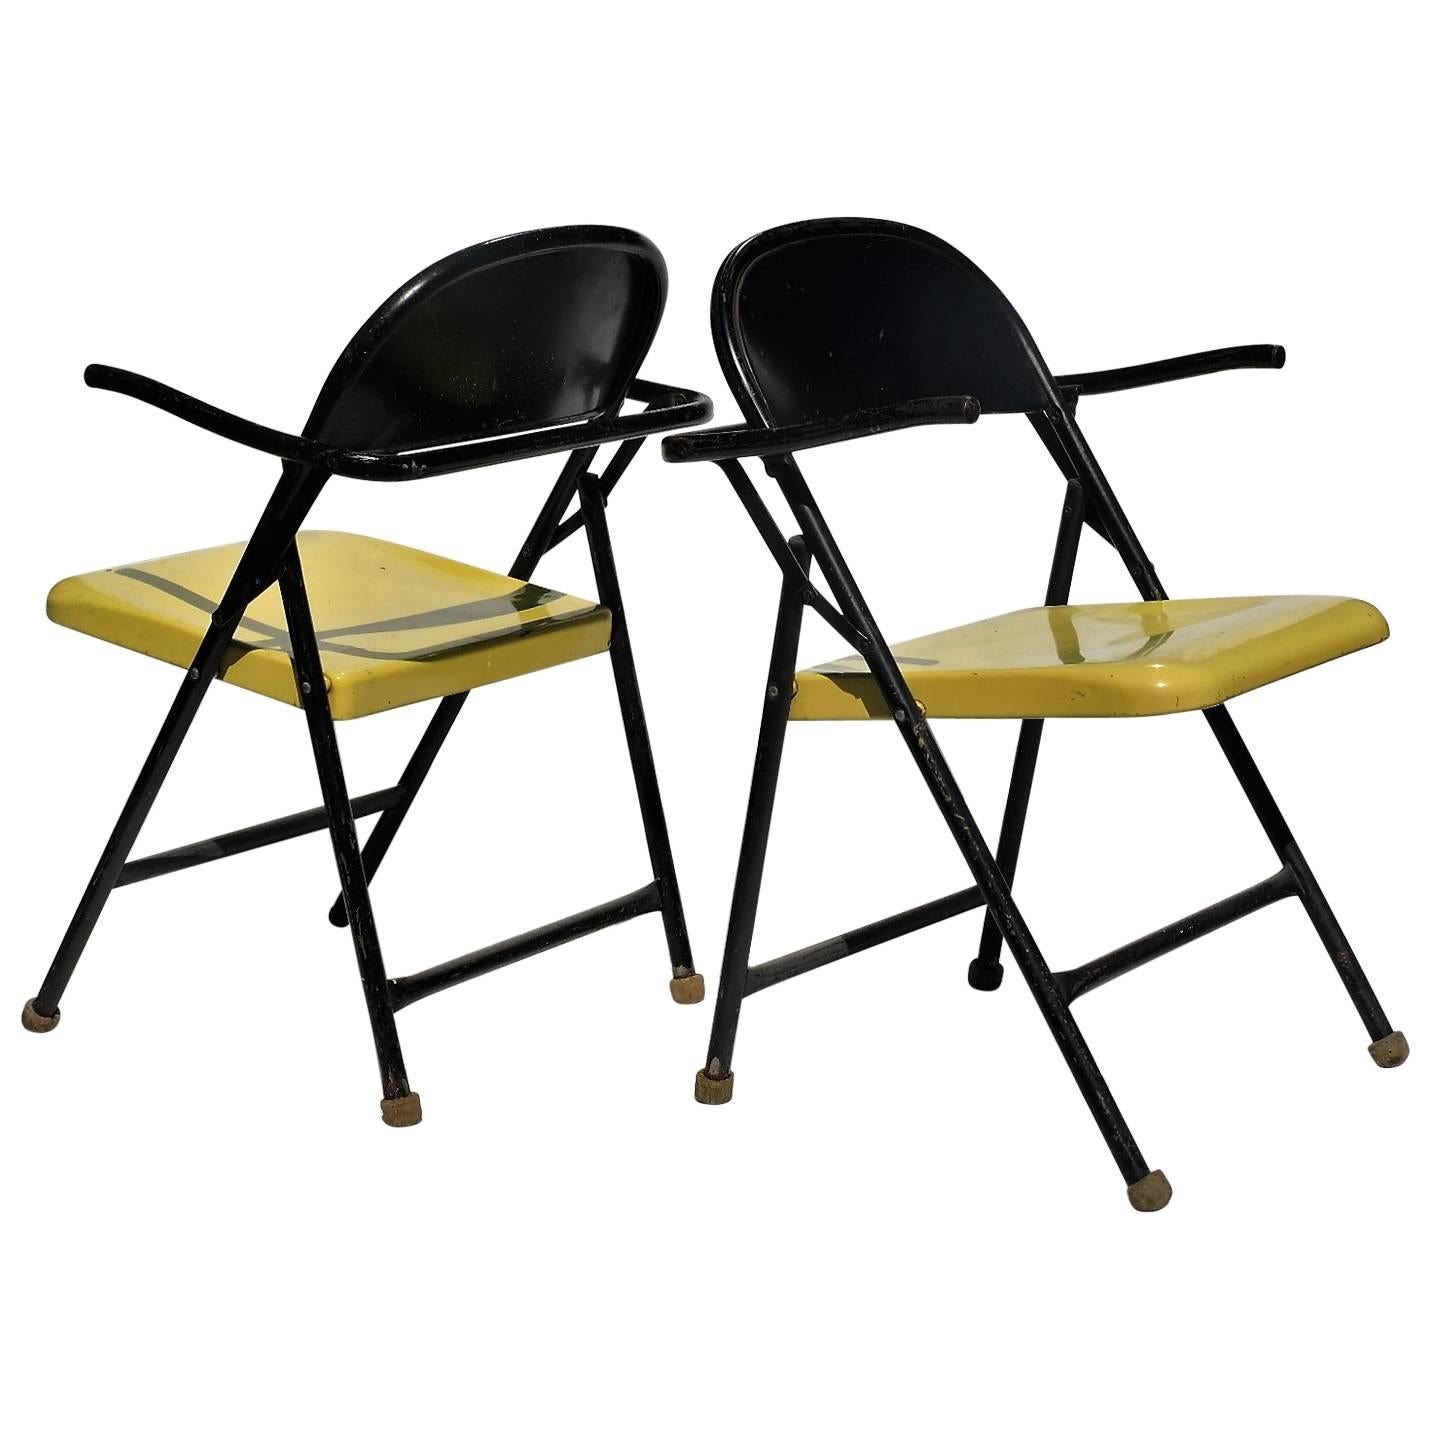 Sculptural Grasshopper Form Black and Yellow Metal Folding Chairs For Sale